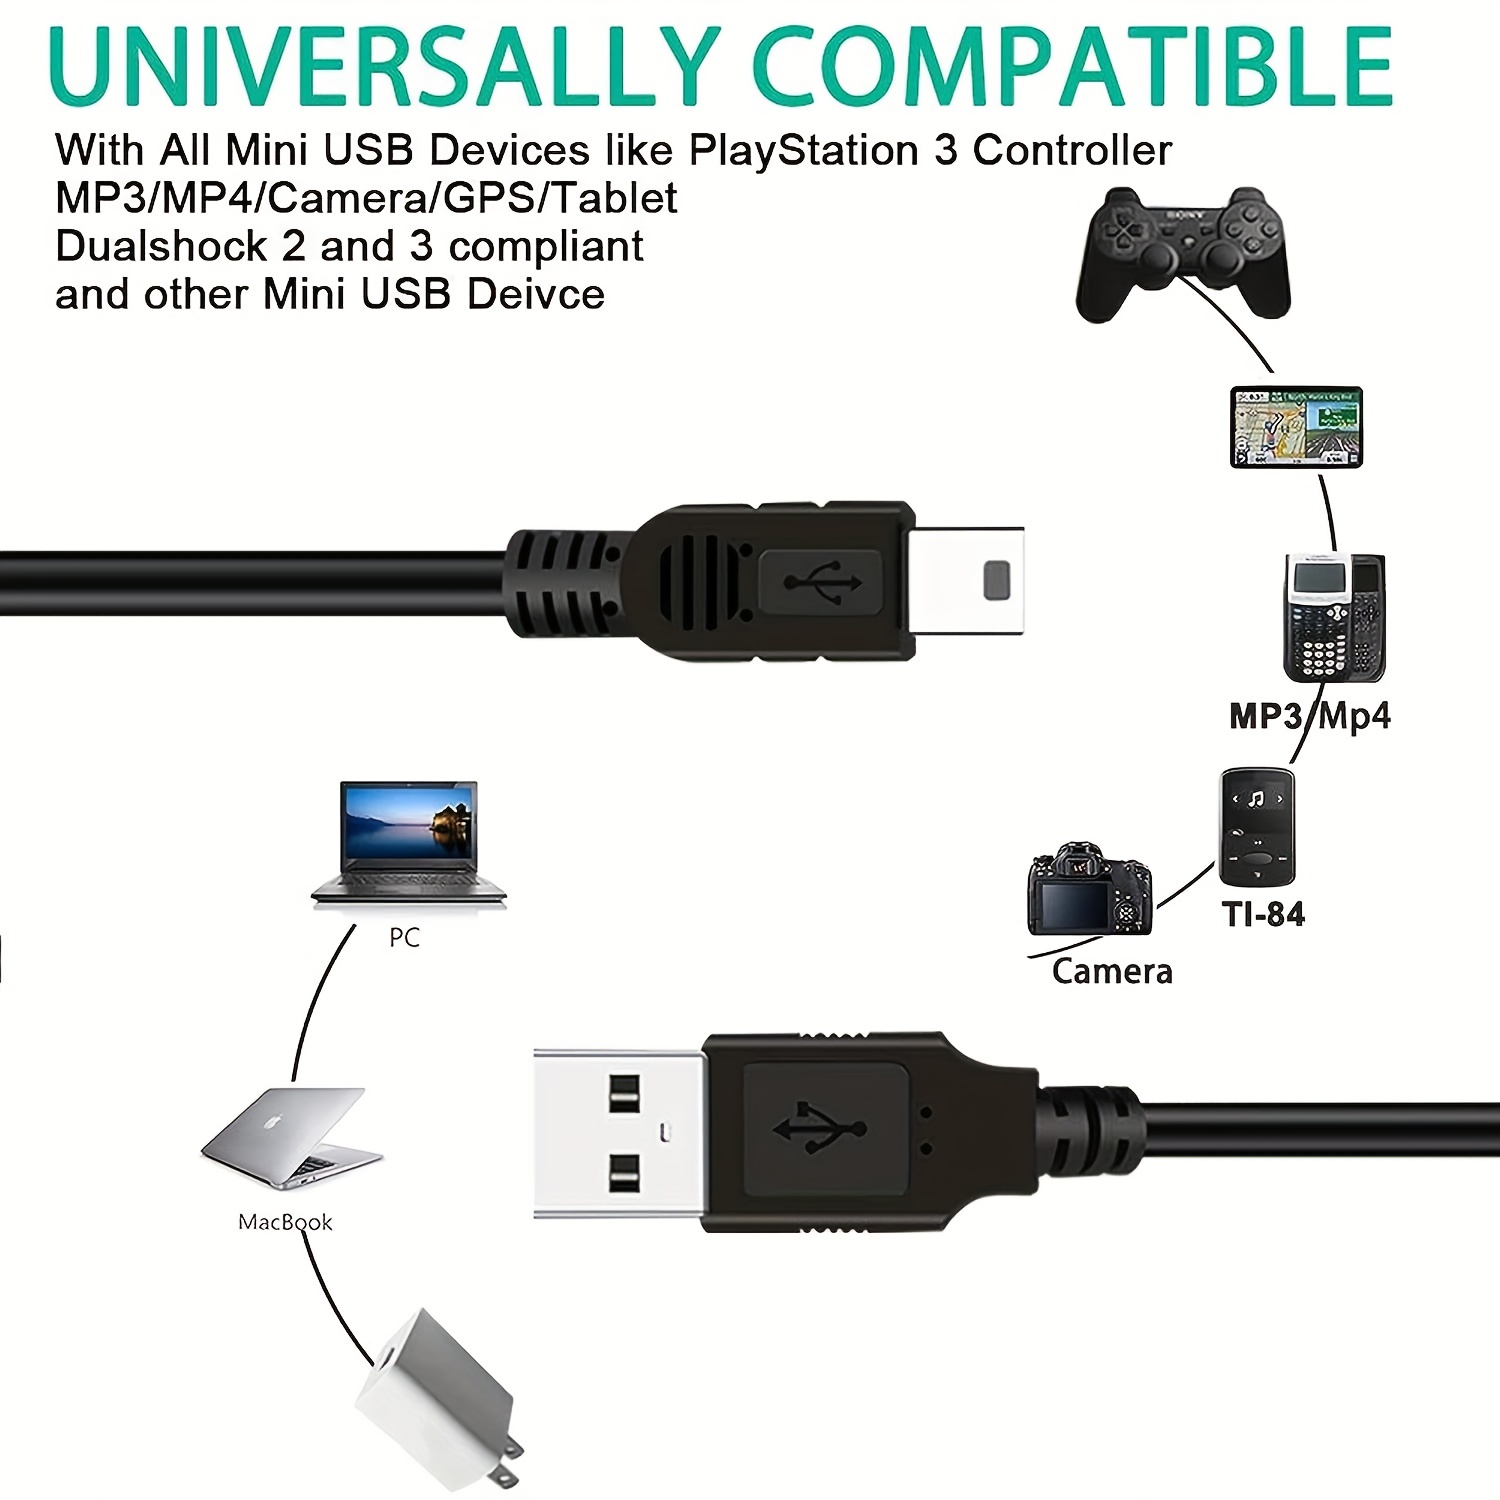 ABLEGRID Mini USB SYNC Data PC Cord Cable for BLUE YETI MicroPhones